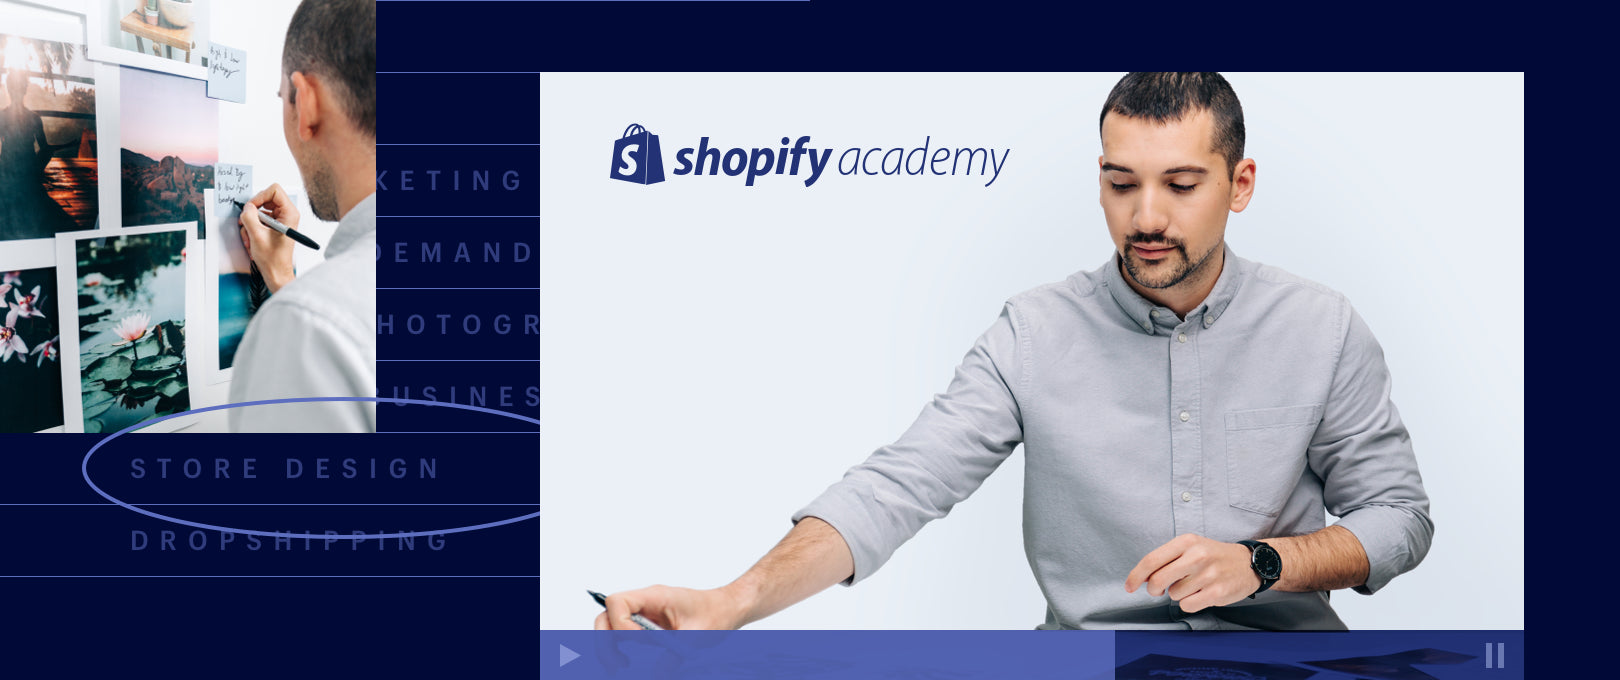 Ecommerce Store Design Course from Shopify